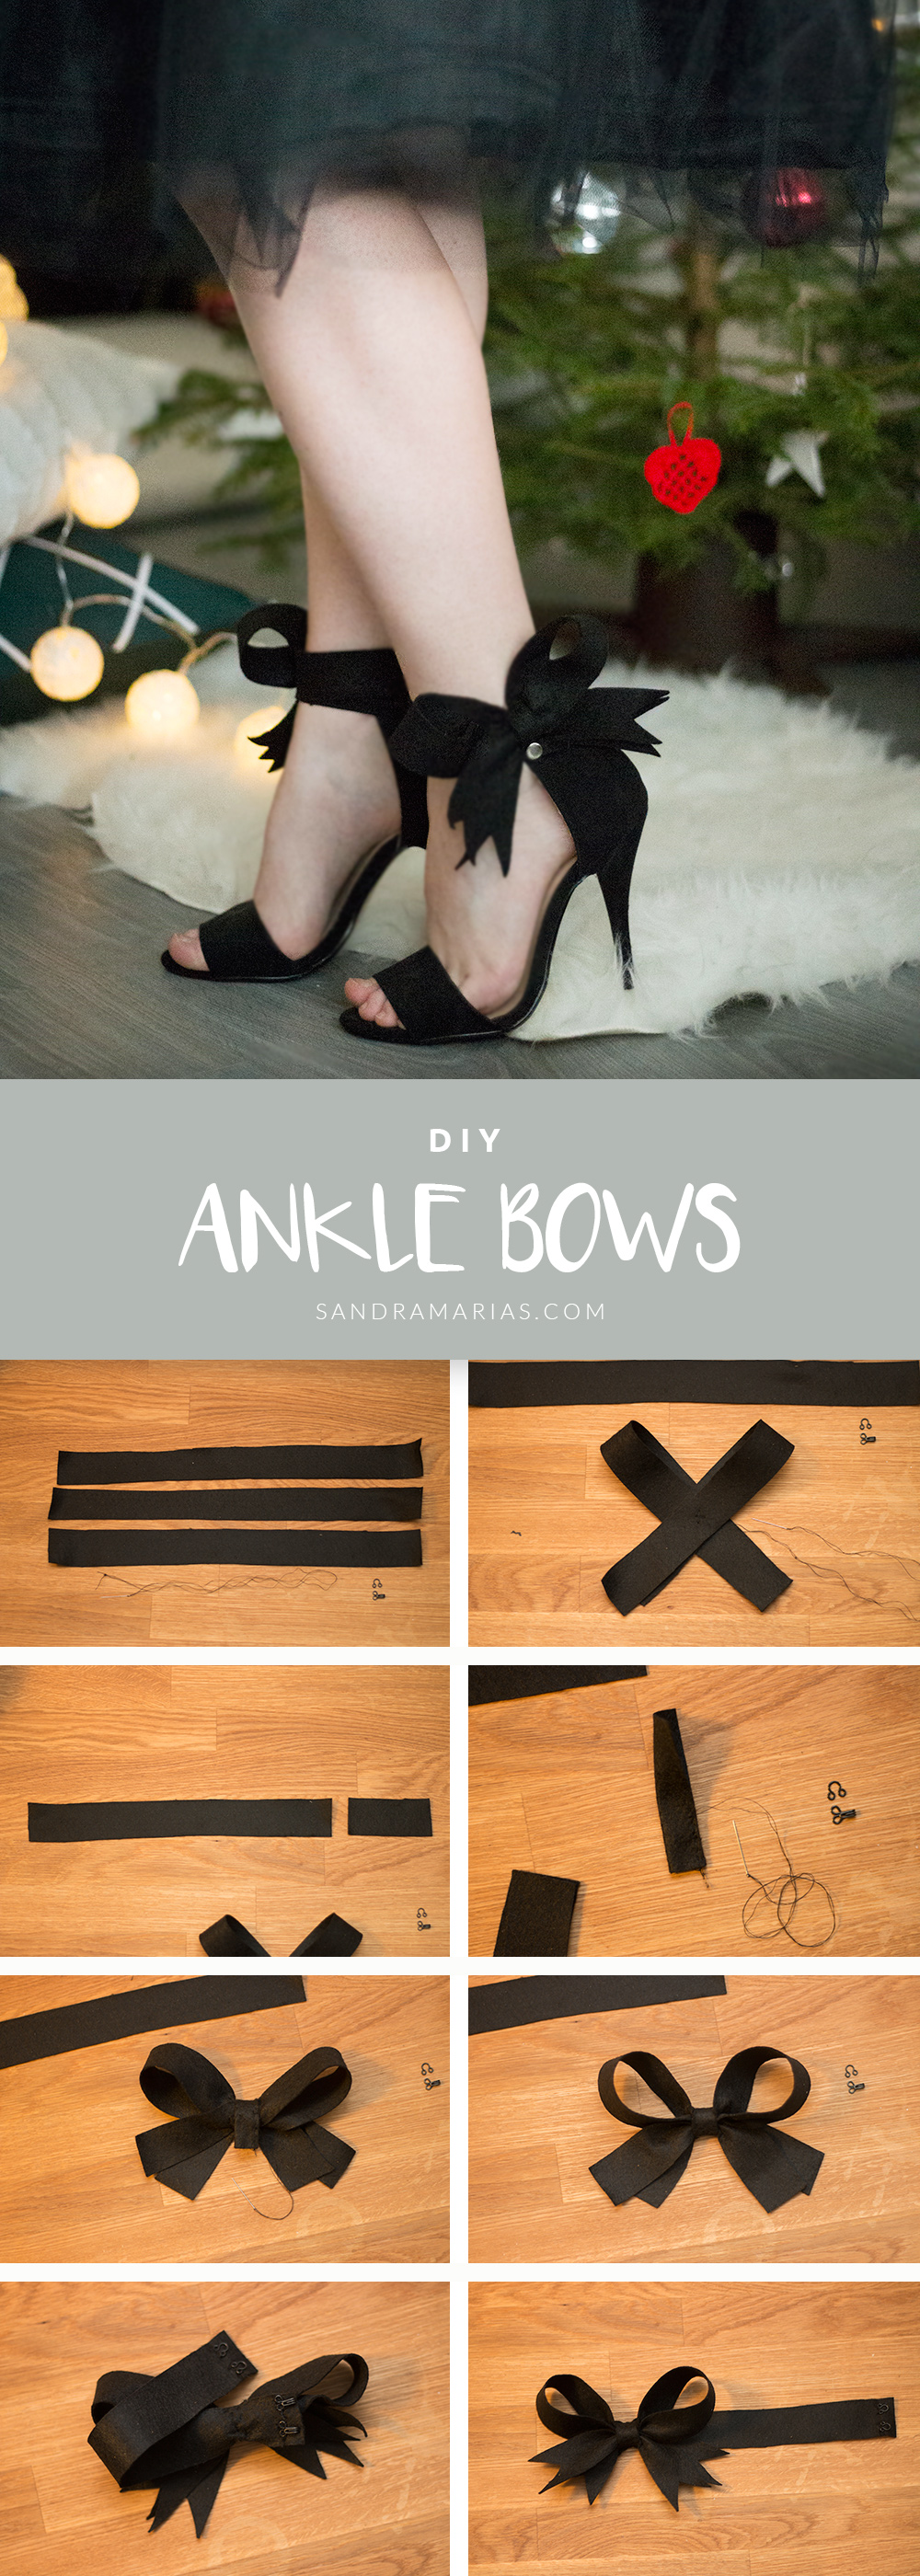 DIY Ankle bows for your heels | New heels without ruining them | Sandramarias.com